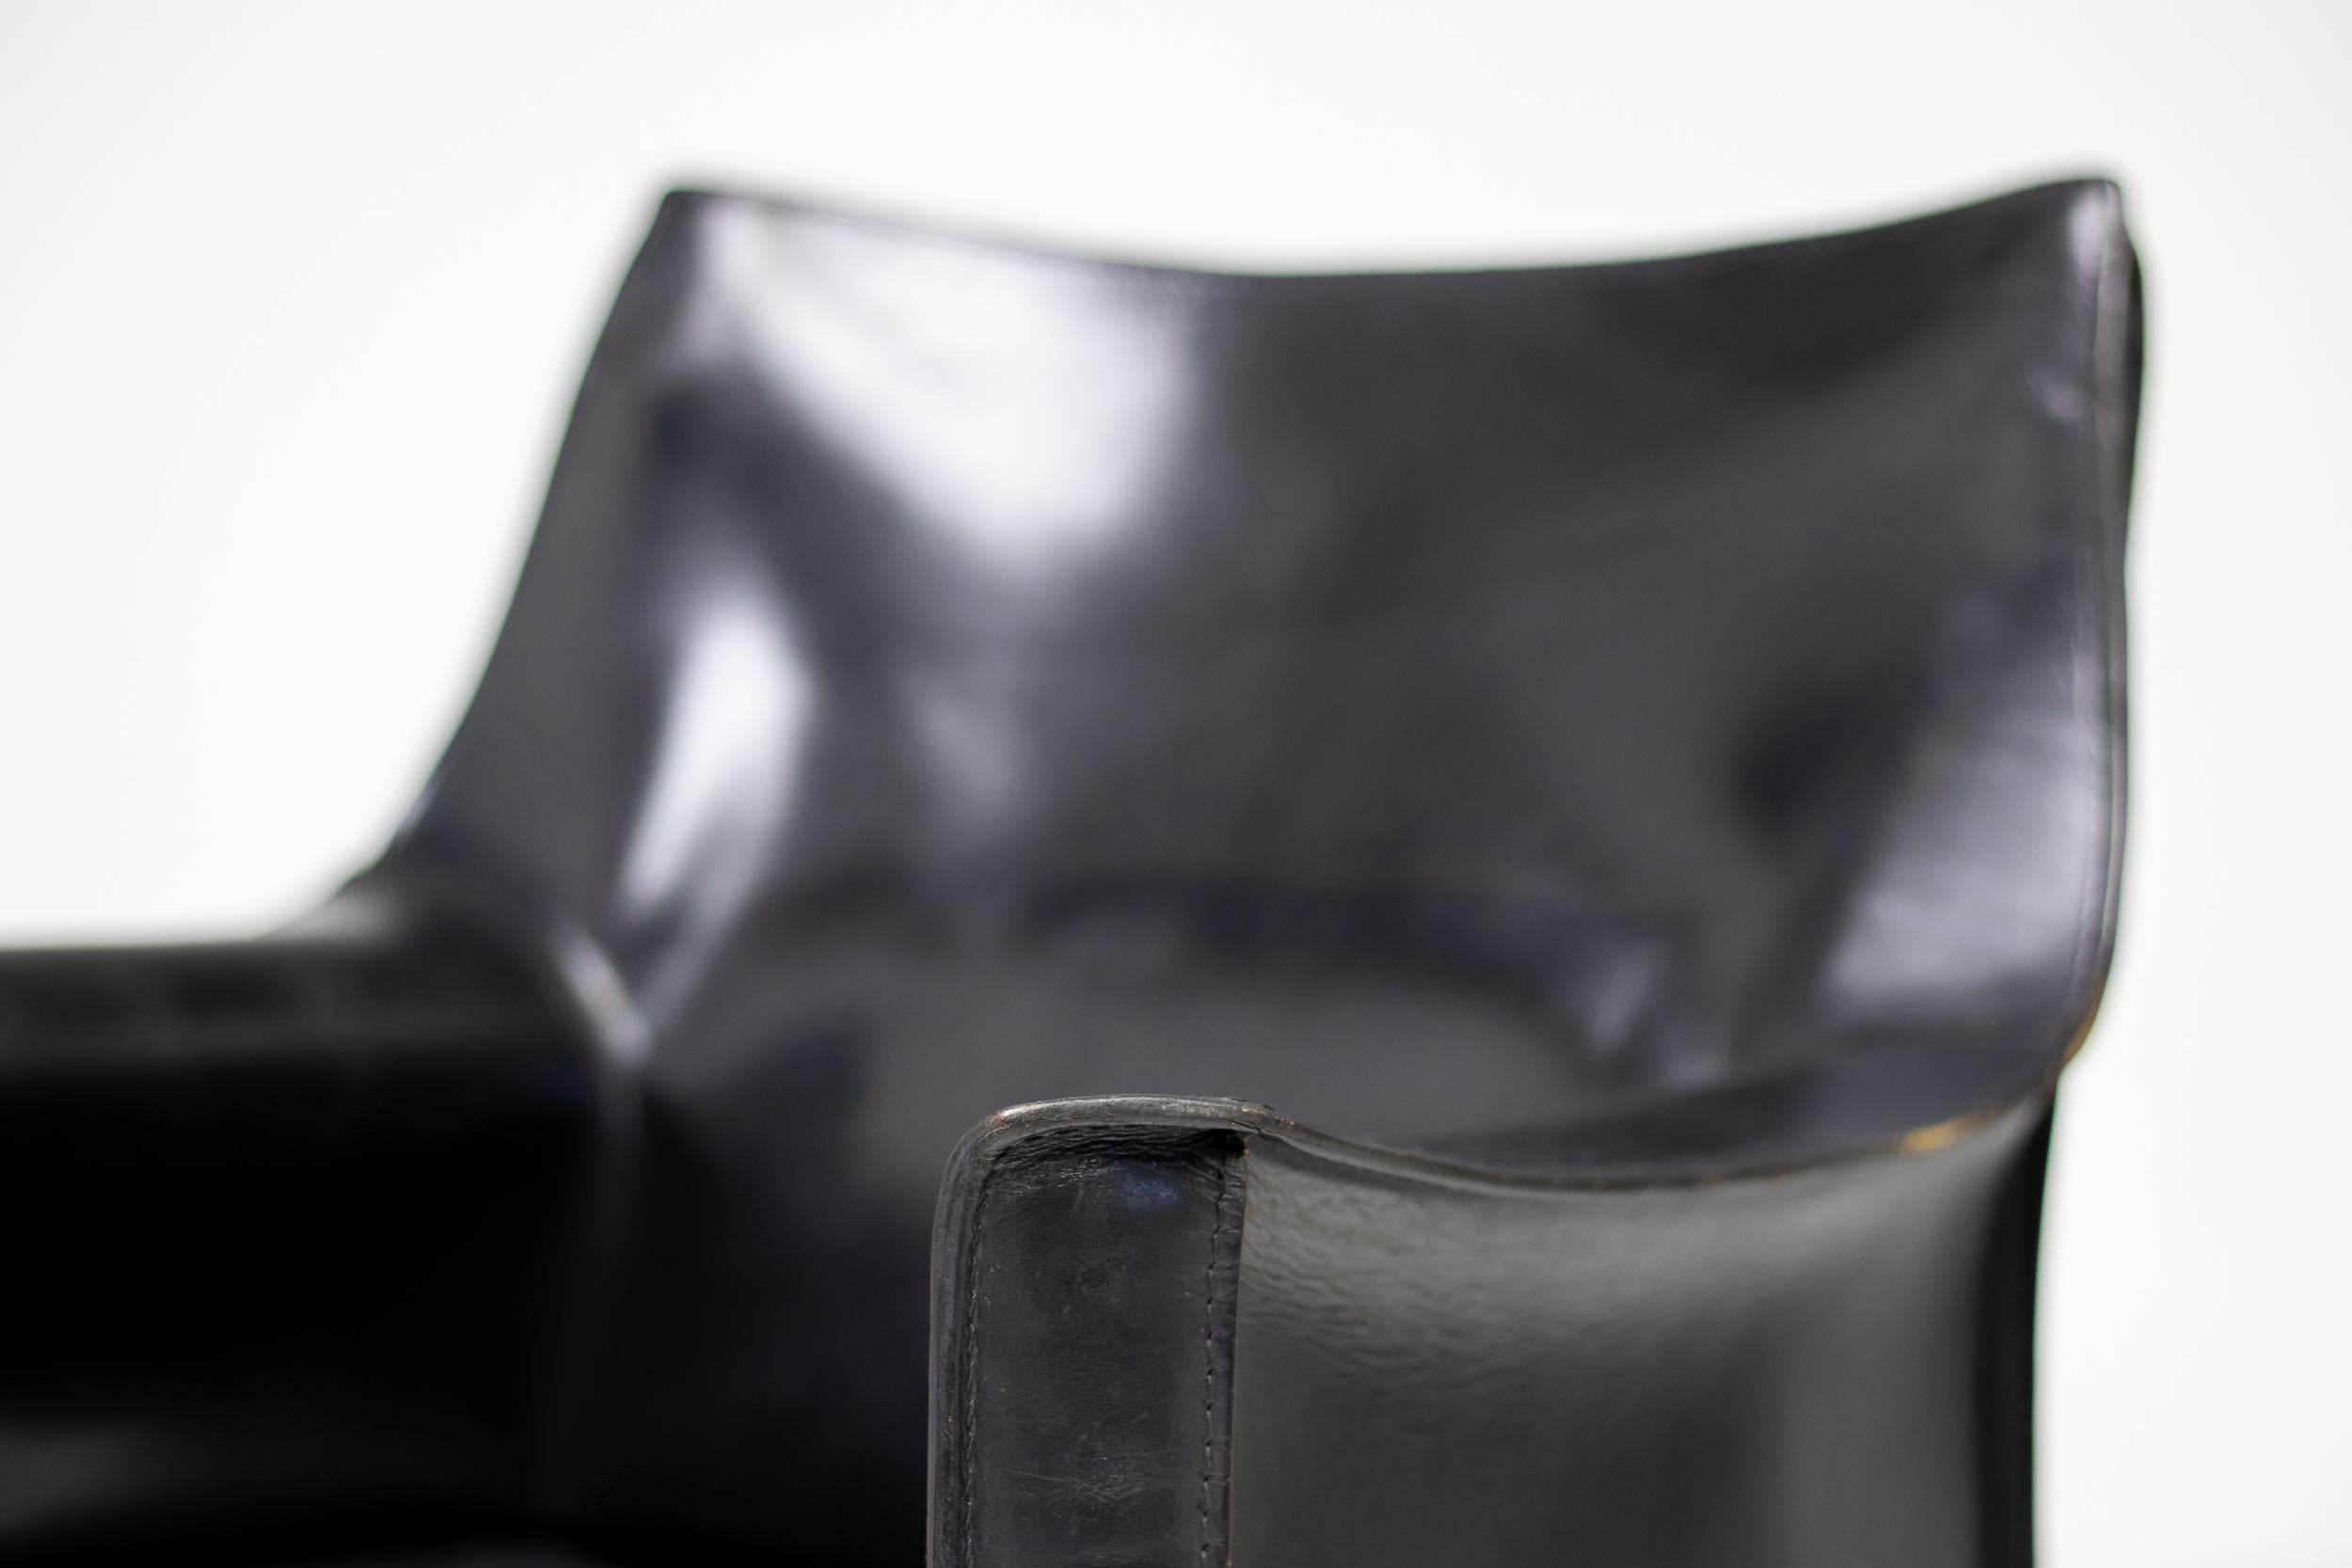 Mario Bellini for Cassina CAB 413 chair in black Italian leather, made in Italy, circa 1990.
High-quality chair consisting of handstitched natural leather upholstery wrapped over internal steel frame. The only additional reinforcement is provided